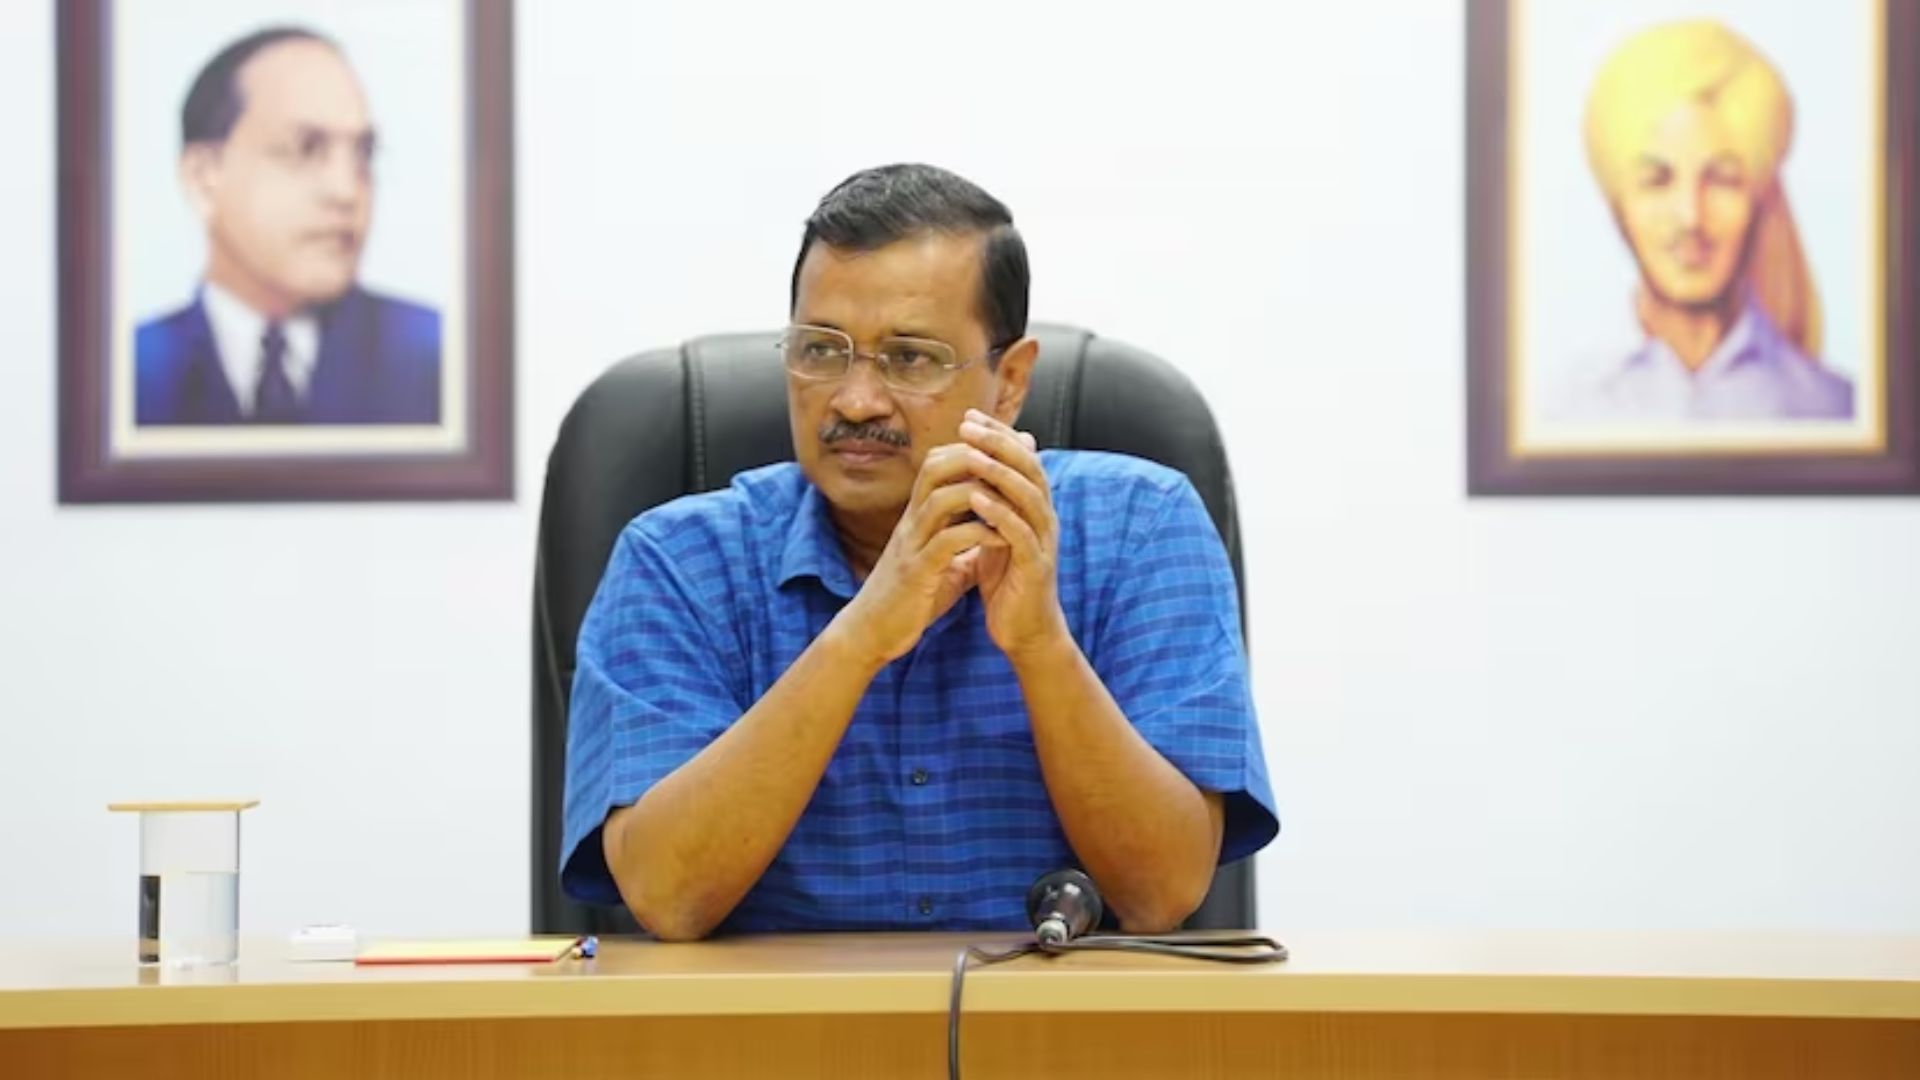 Excise Case: Delhi Court to pass order today on ED complaint against CM Kejriwal over missing summons